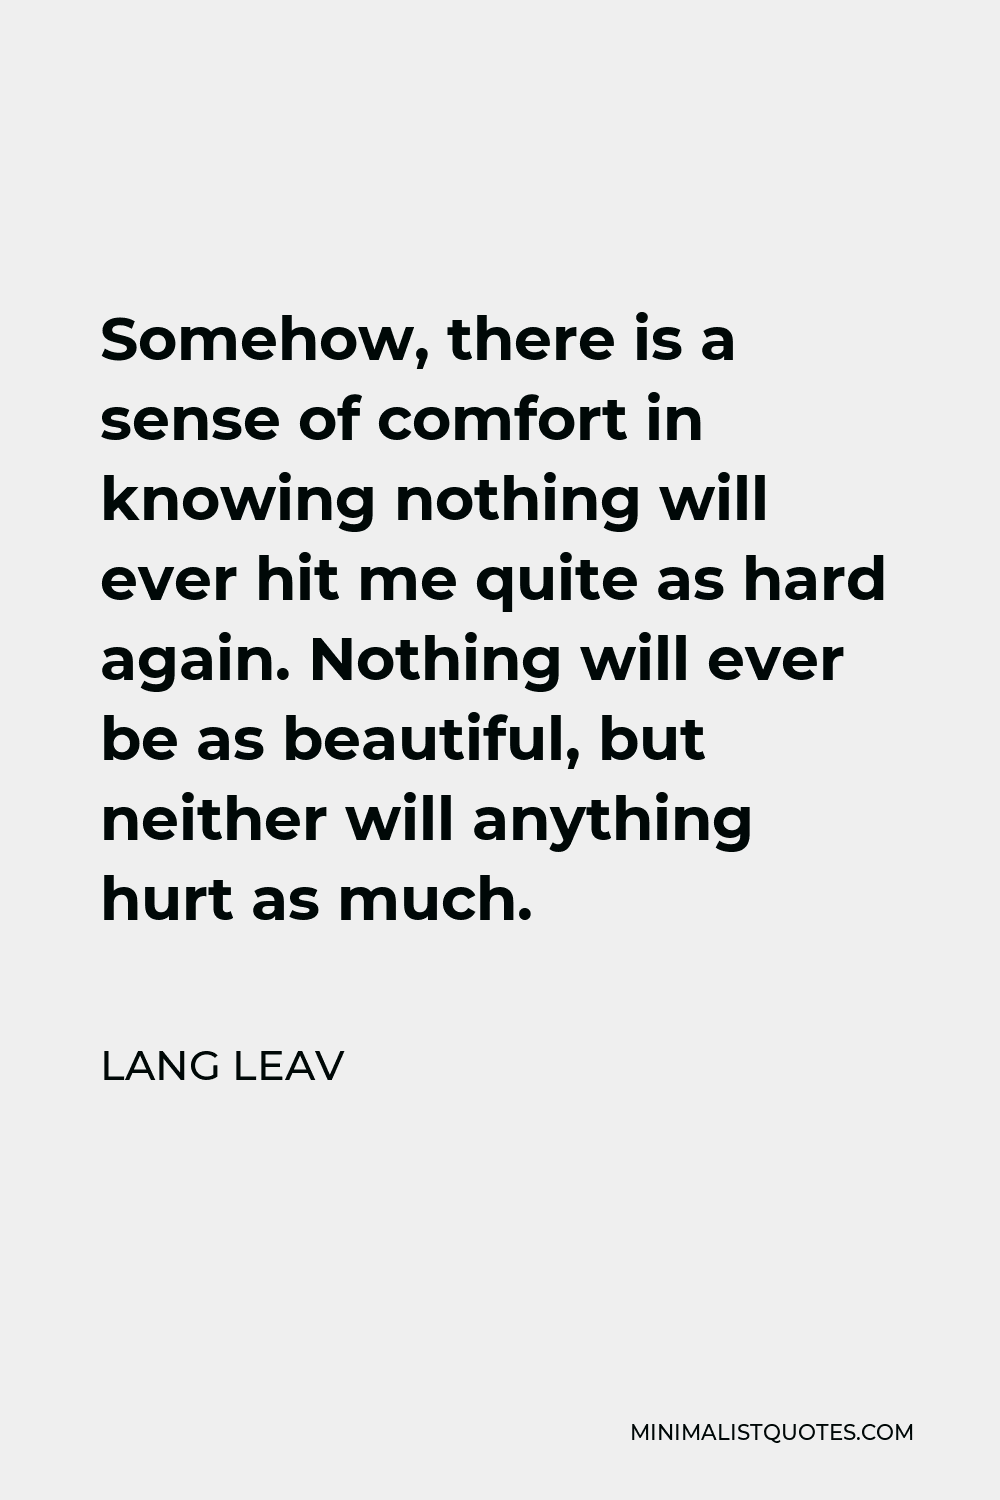 Lang Leav Quote - Somehow, there is a sense of comfort in knowing nothing will ever hit me quite as hard again. Nothing will ever be as beautiful, but neither will anything hurt as much.